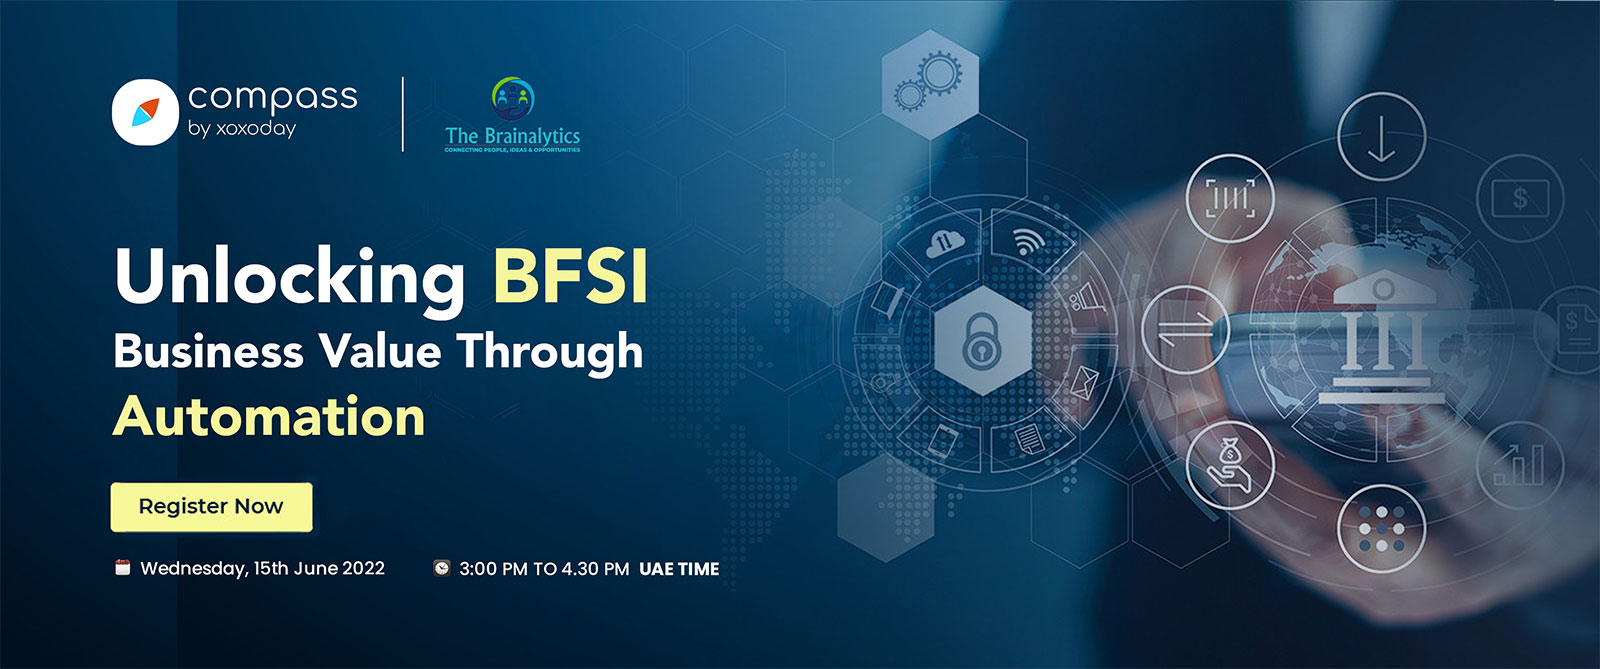 Compass – Unlocking BFSI business value through Automation – The ...